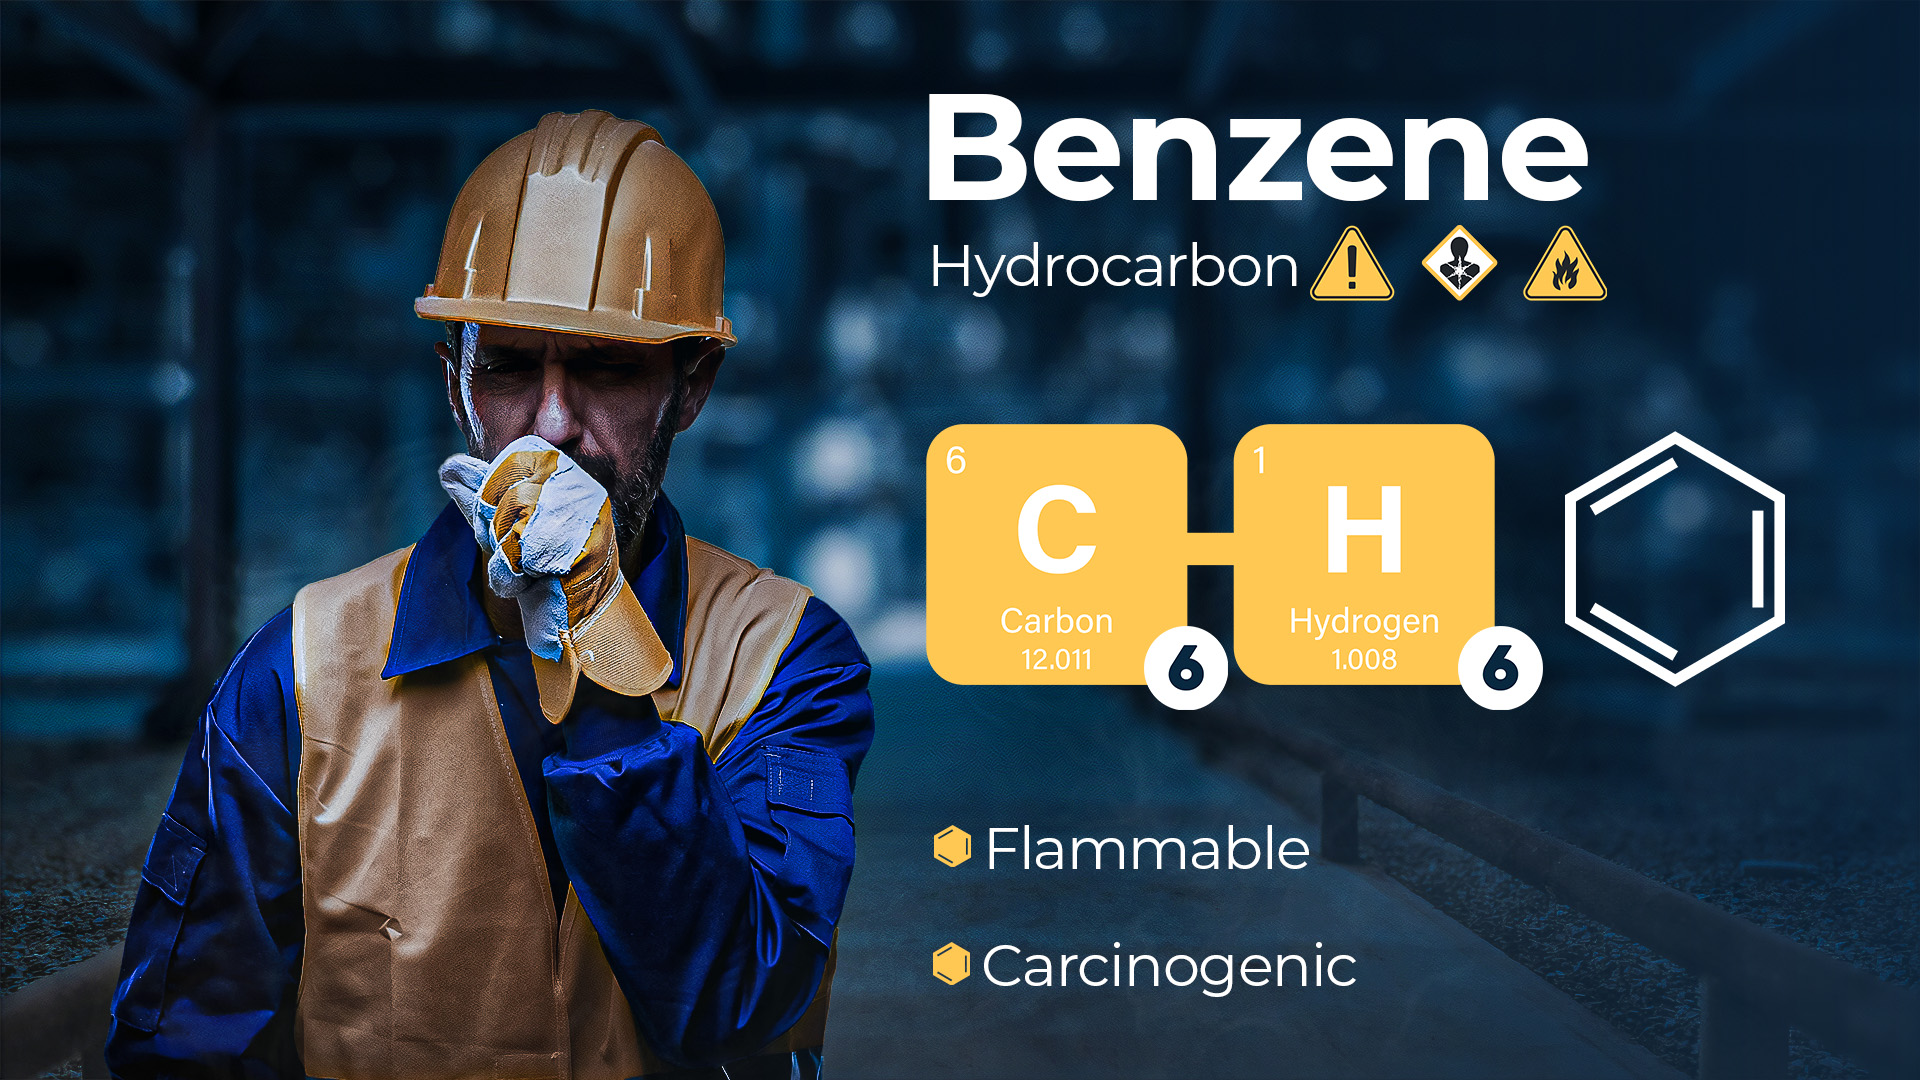 Benzene | Hydrocarbon | C6H6 | flammable and Carcinogenic | Man in hard hat covers mouth in petrochemical setting.